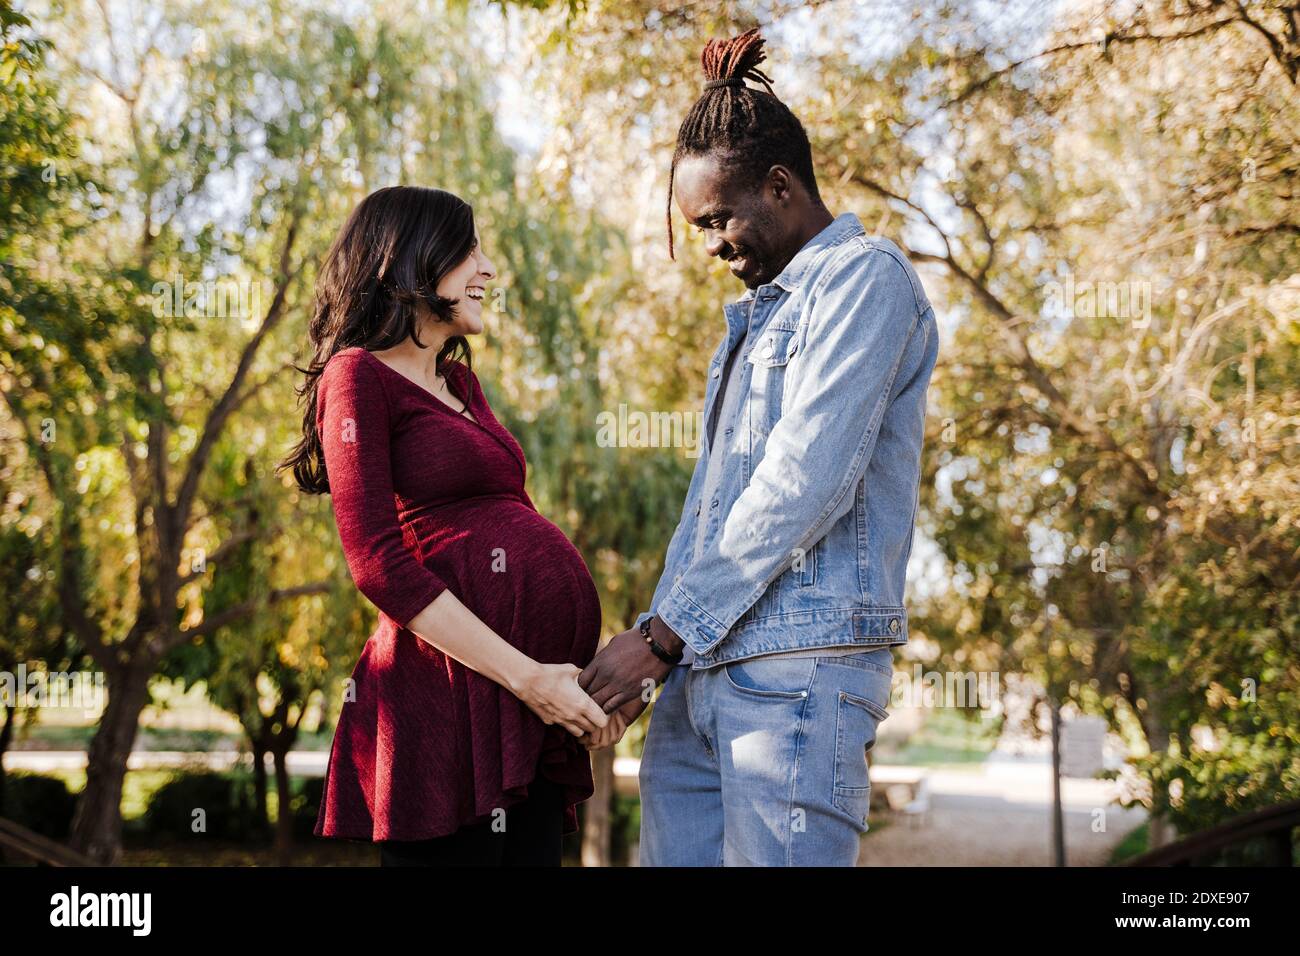 Happy man looking at pregnant woman's stomach in park Stock Photo